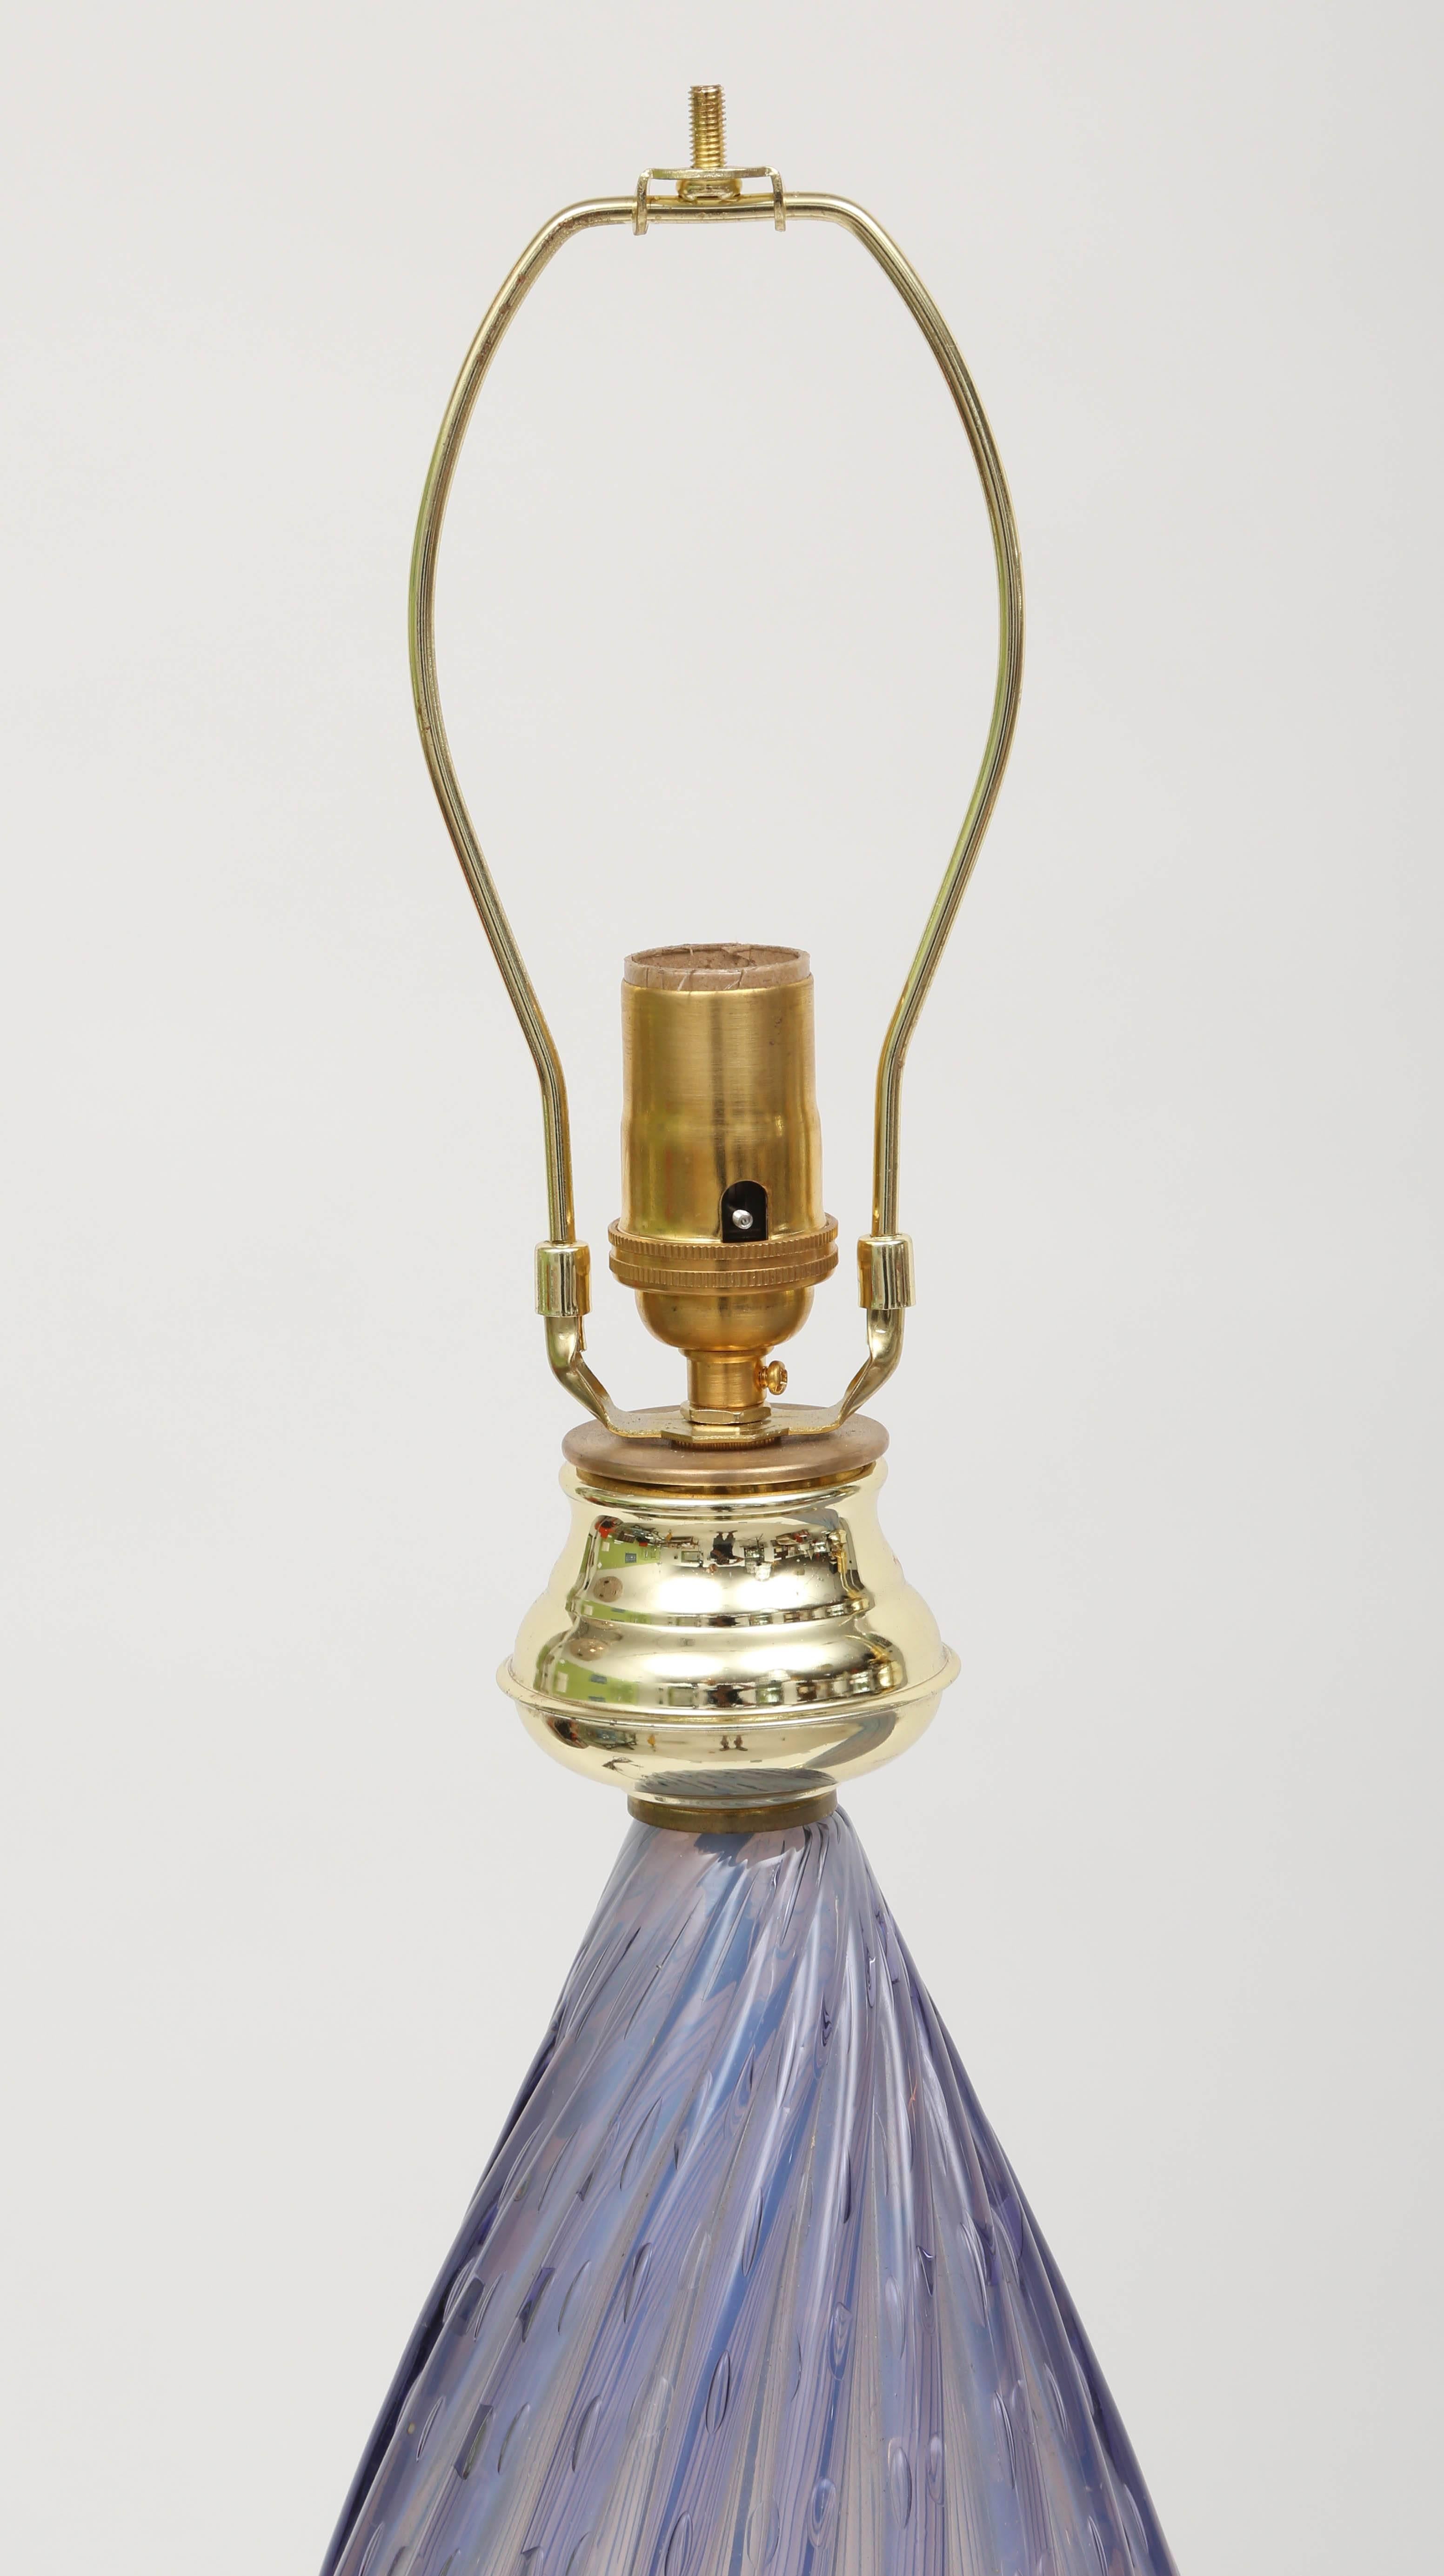 Pair of vintage periwinkle Murano glass table lamps with controlled bubble technique and brass accents. Made by Barbini. The height is 30" to top of finial.